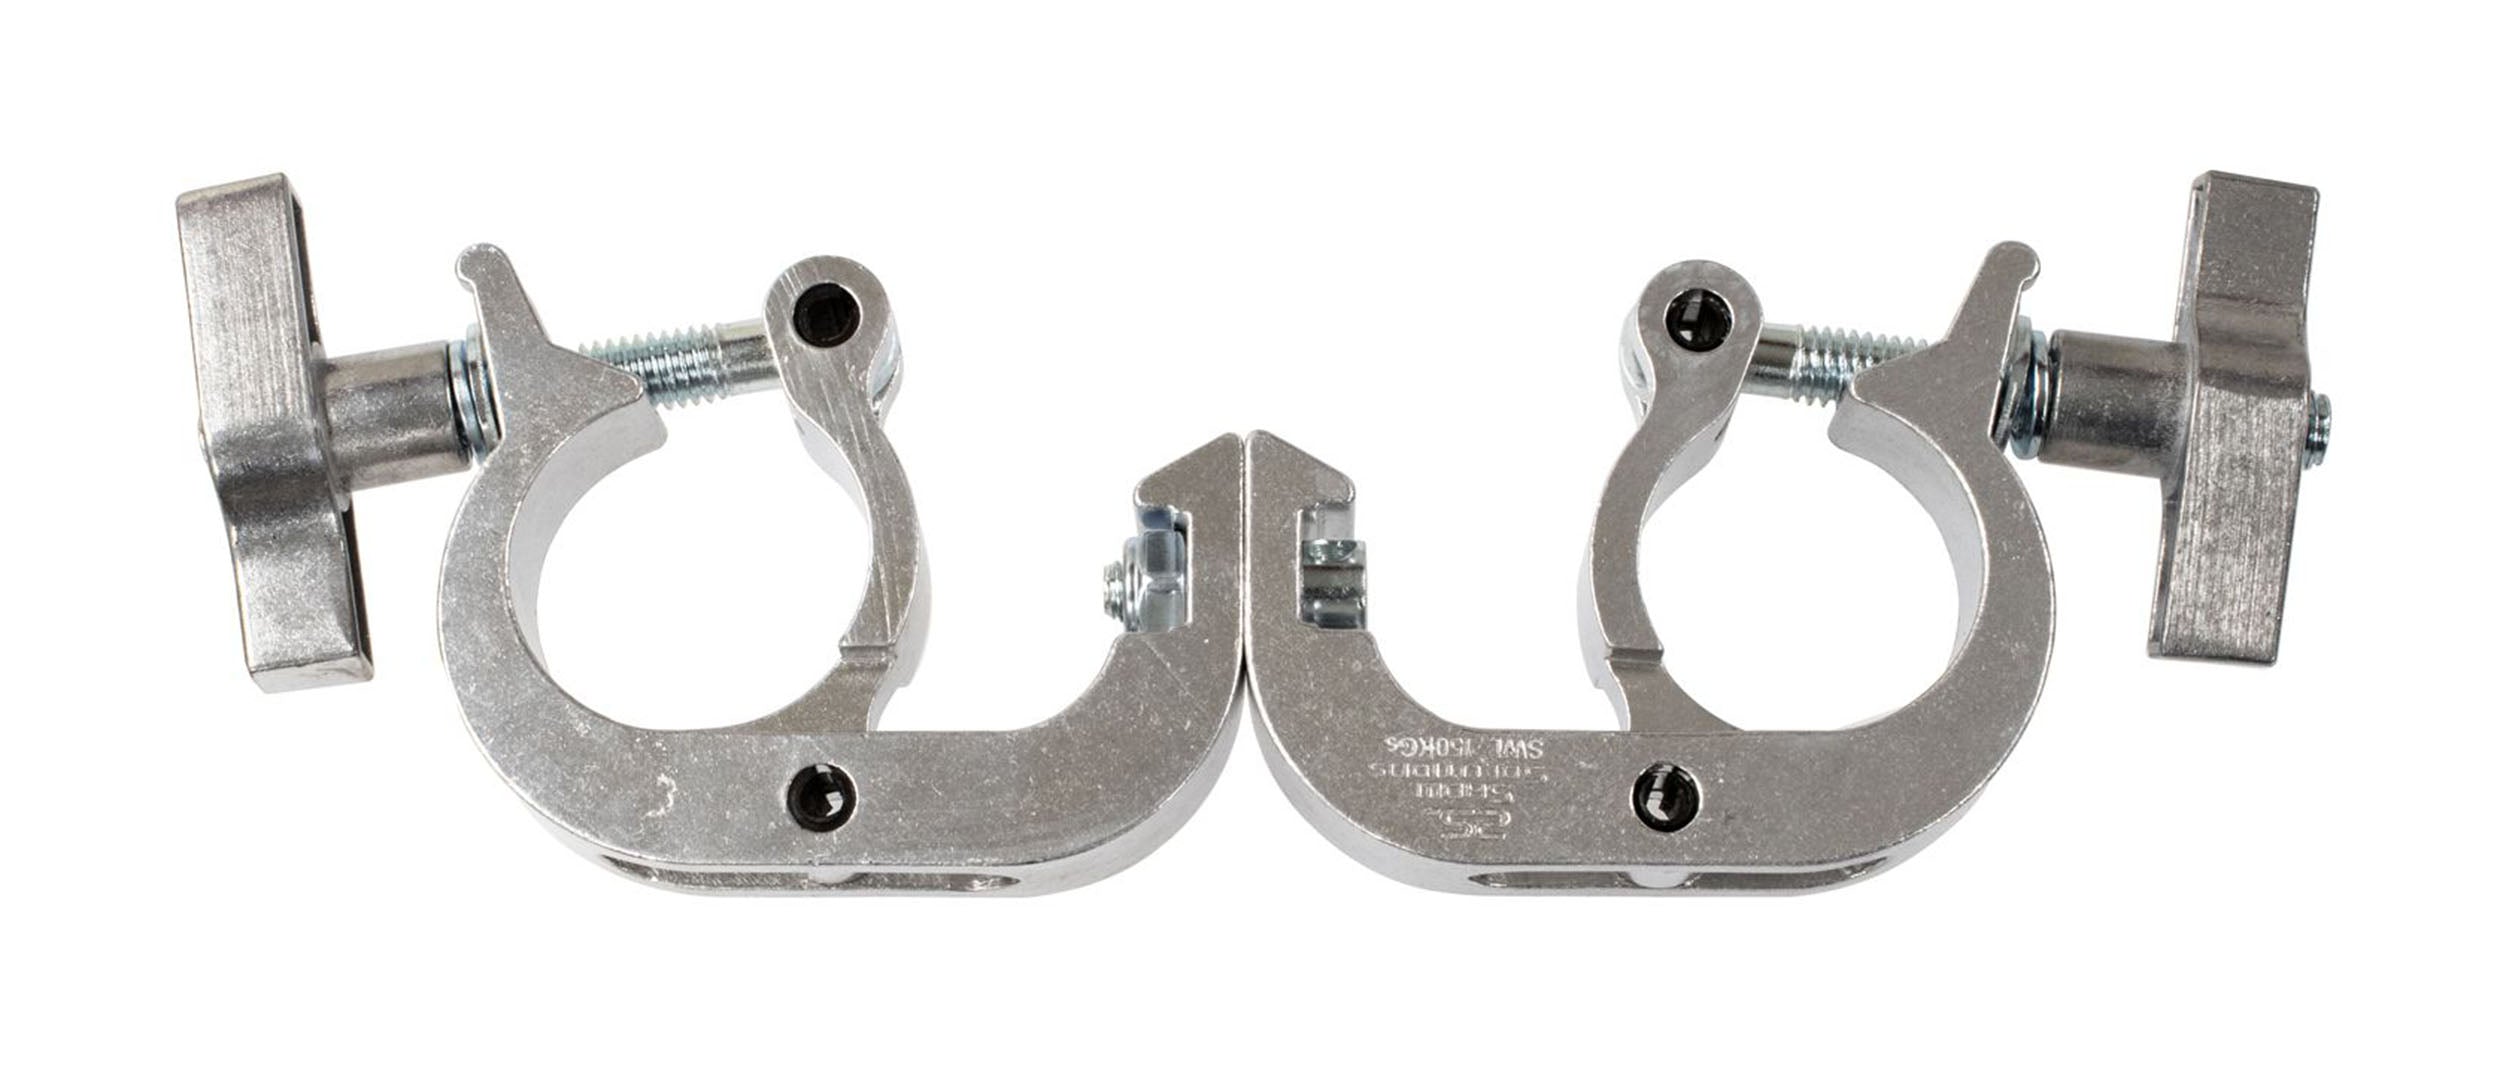 Odyssey LACT282, Dual Pro Coupler Trigger Clamp, Fits 1.9-2" Tube, 330 lb Load by Odyssey